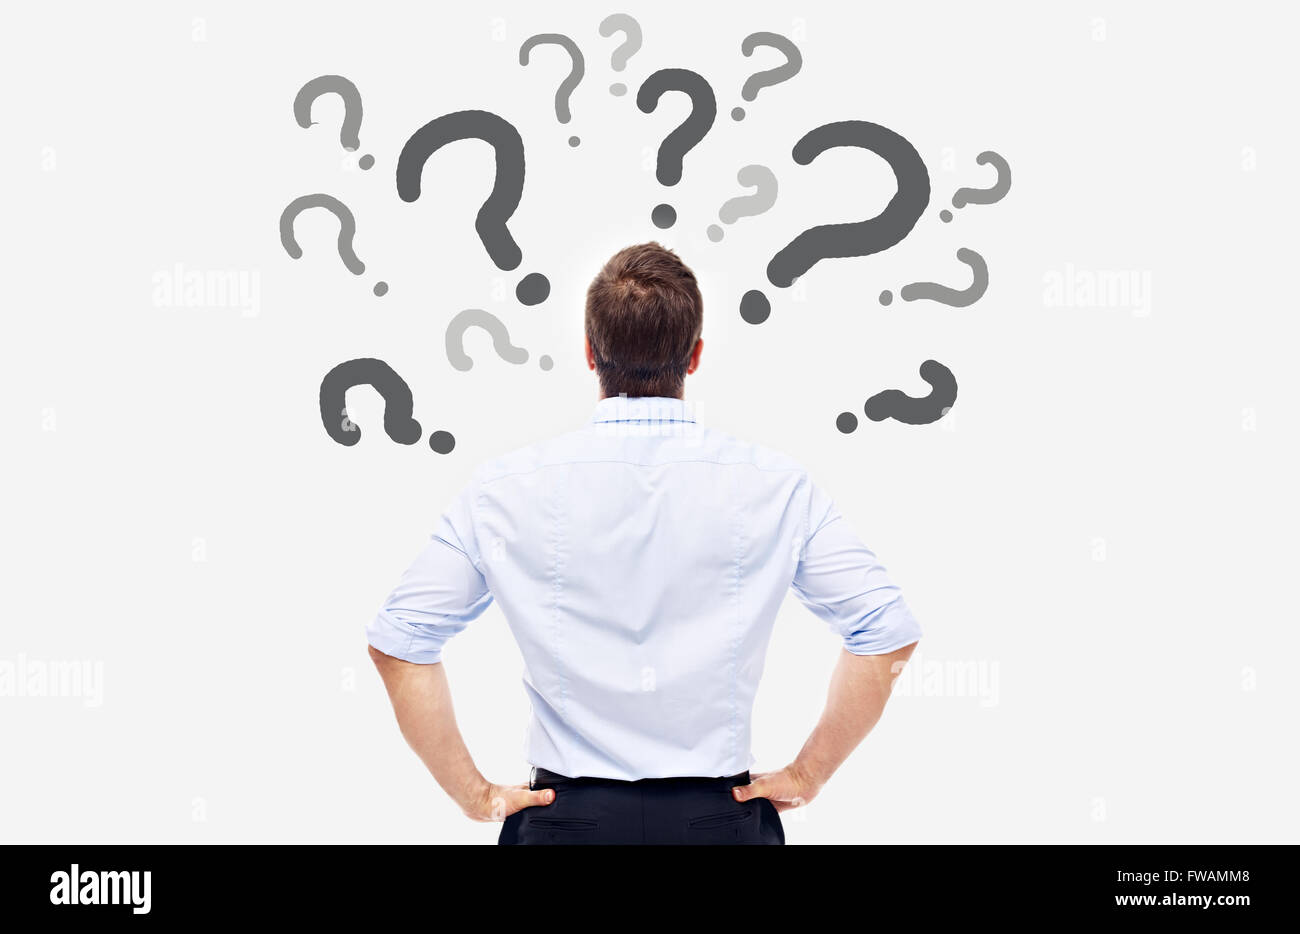 business man looking at the question marks on white board and thinking. Stock Photo